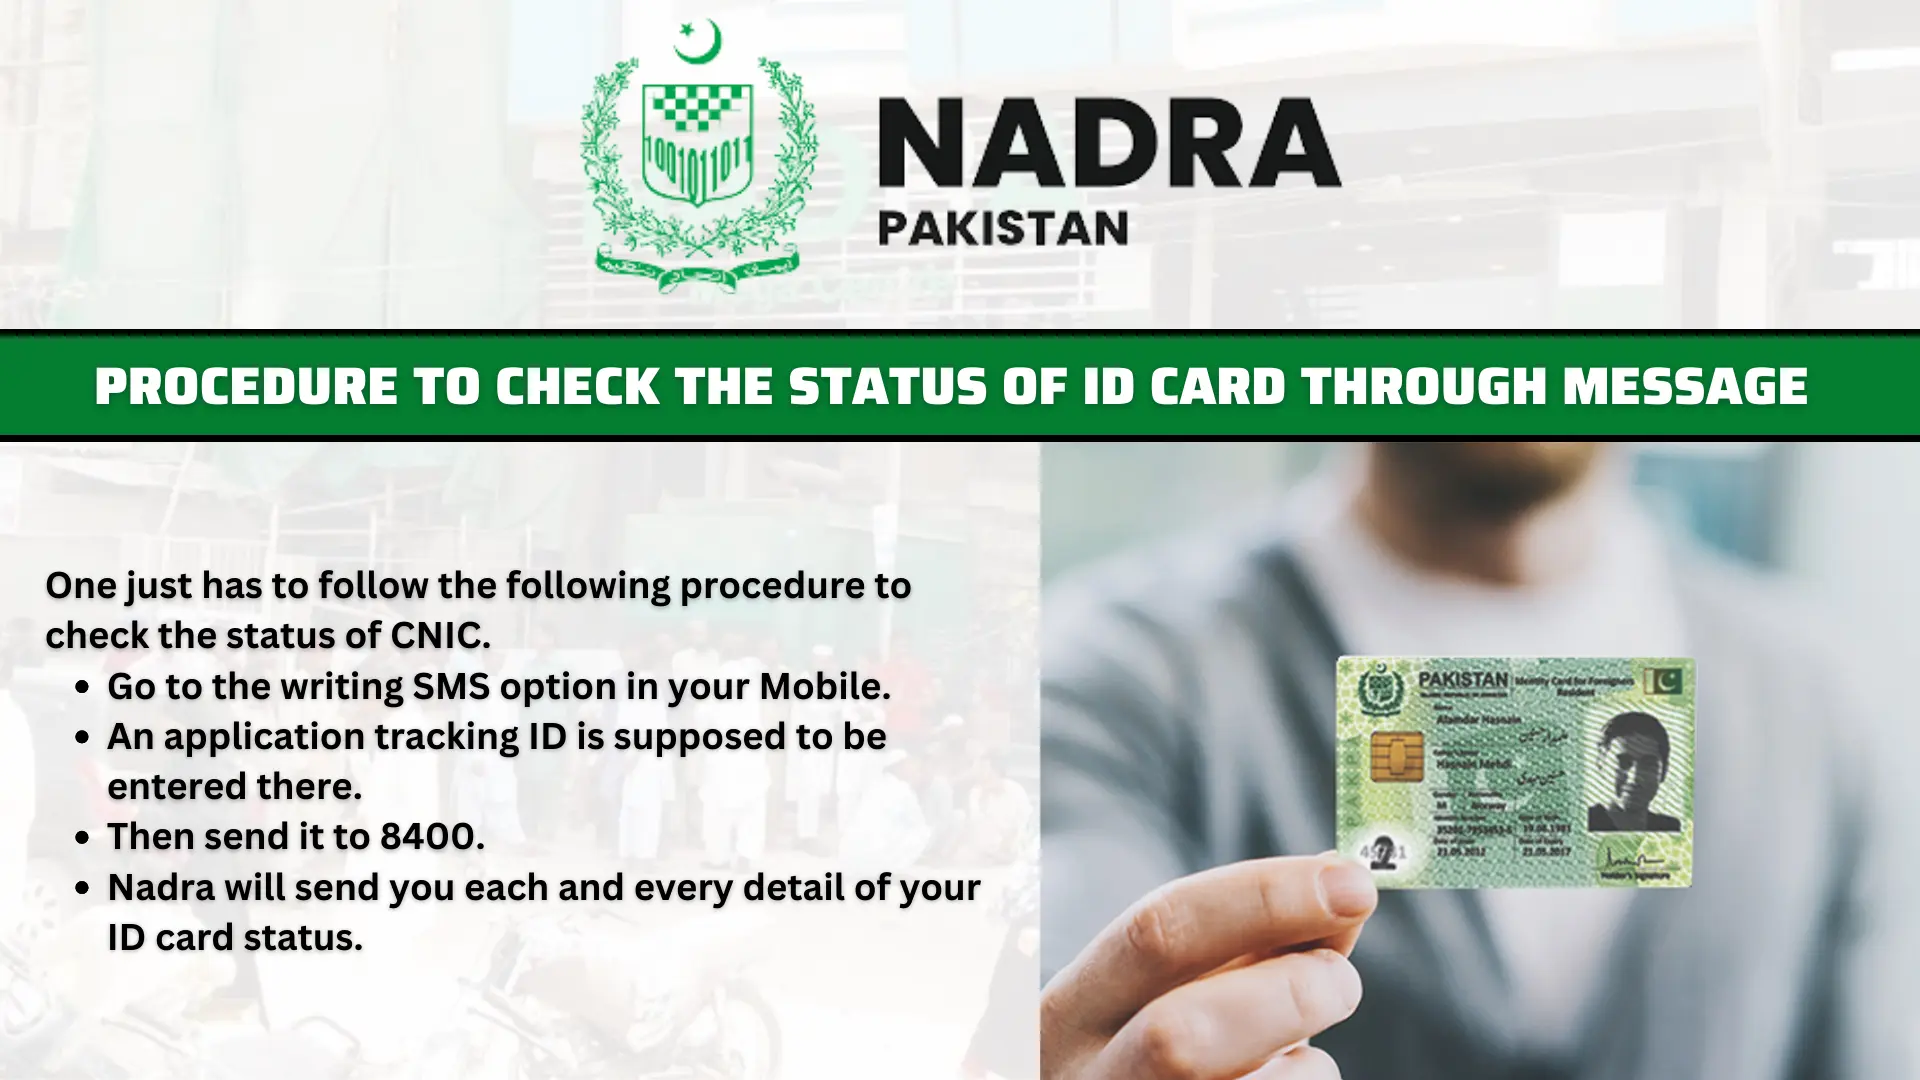 Procedure to check the status of ID card through Message